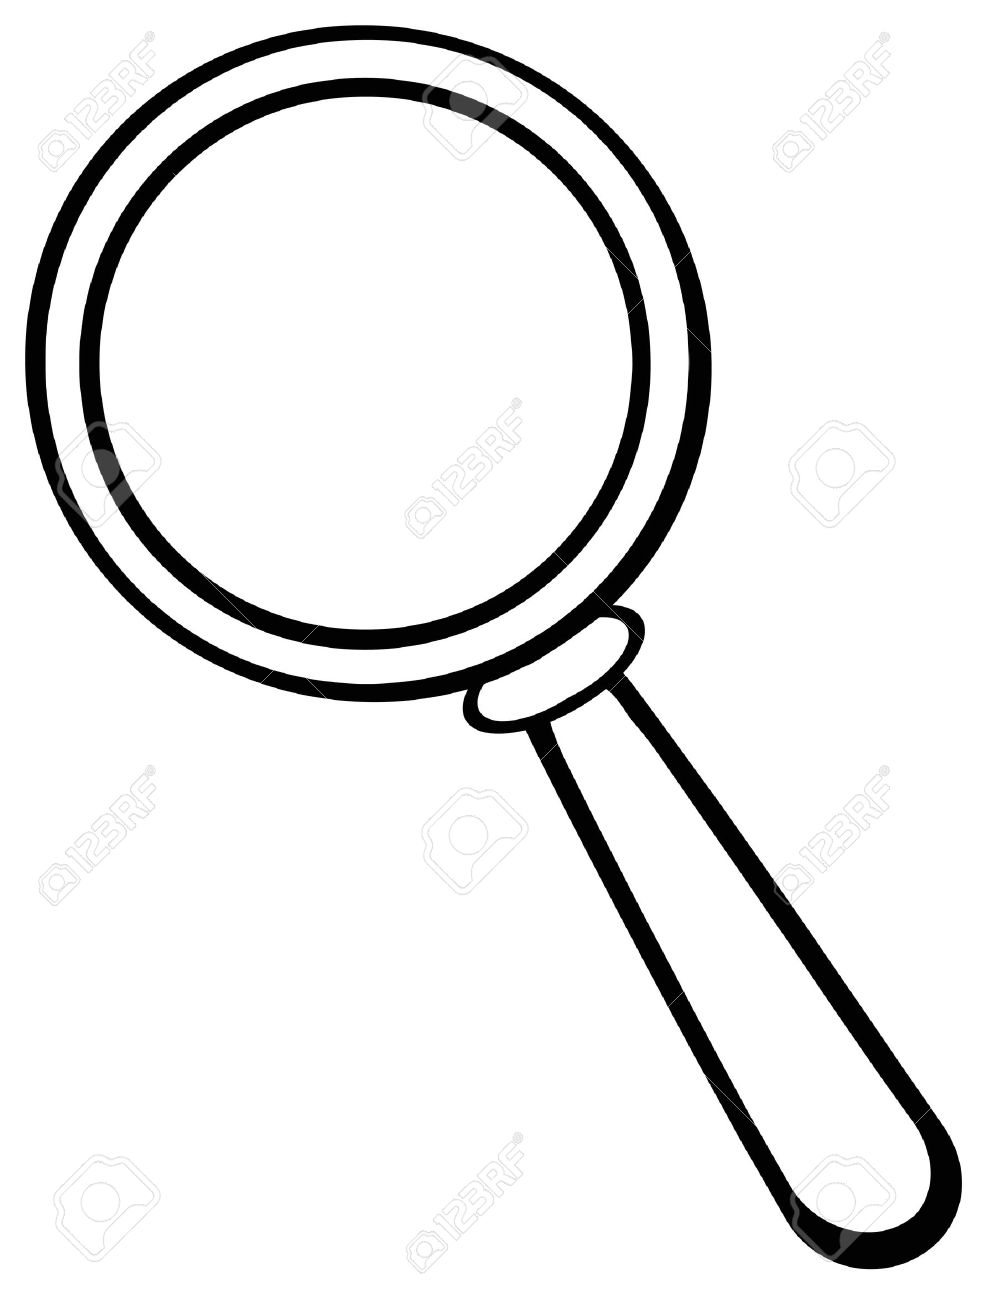 Outlined Magnifying Glass Stock Vector - 12493445